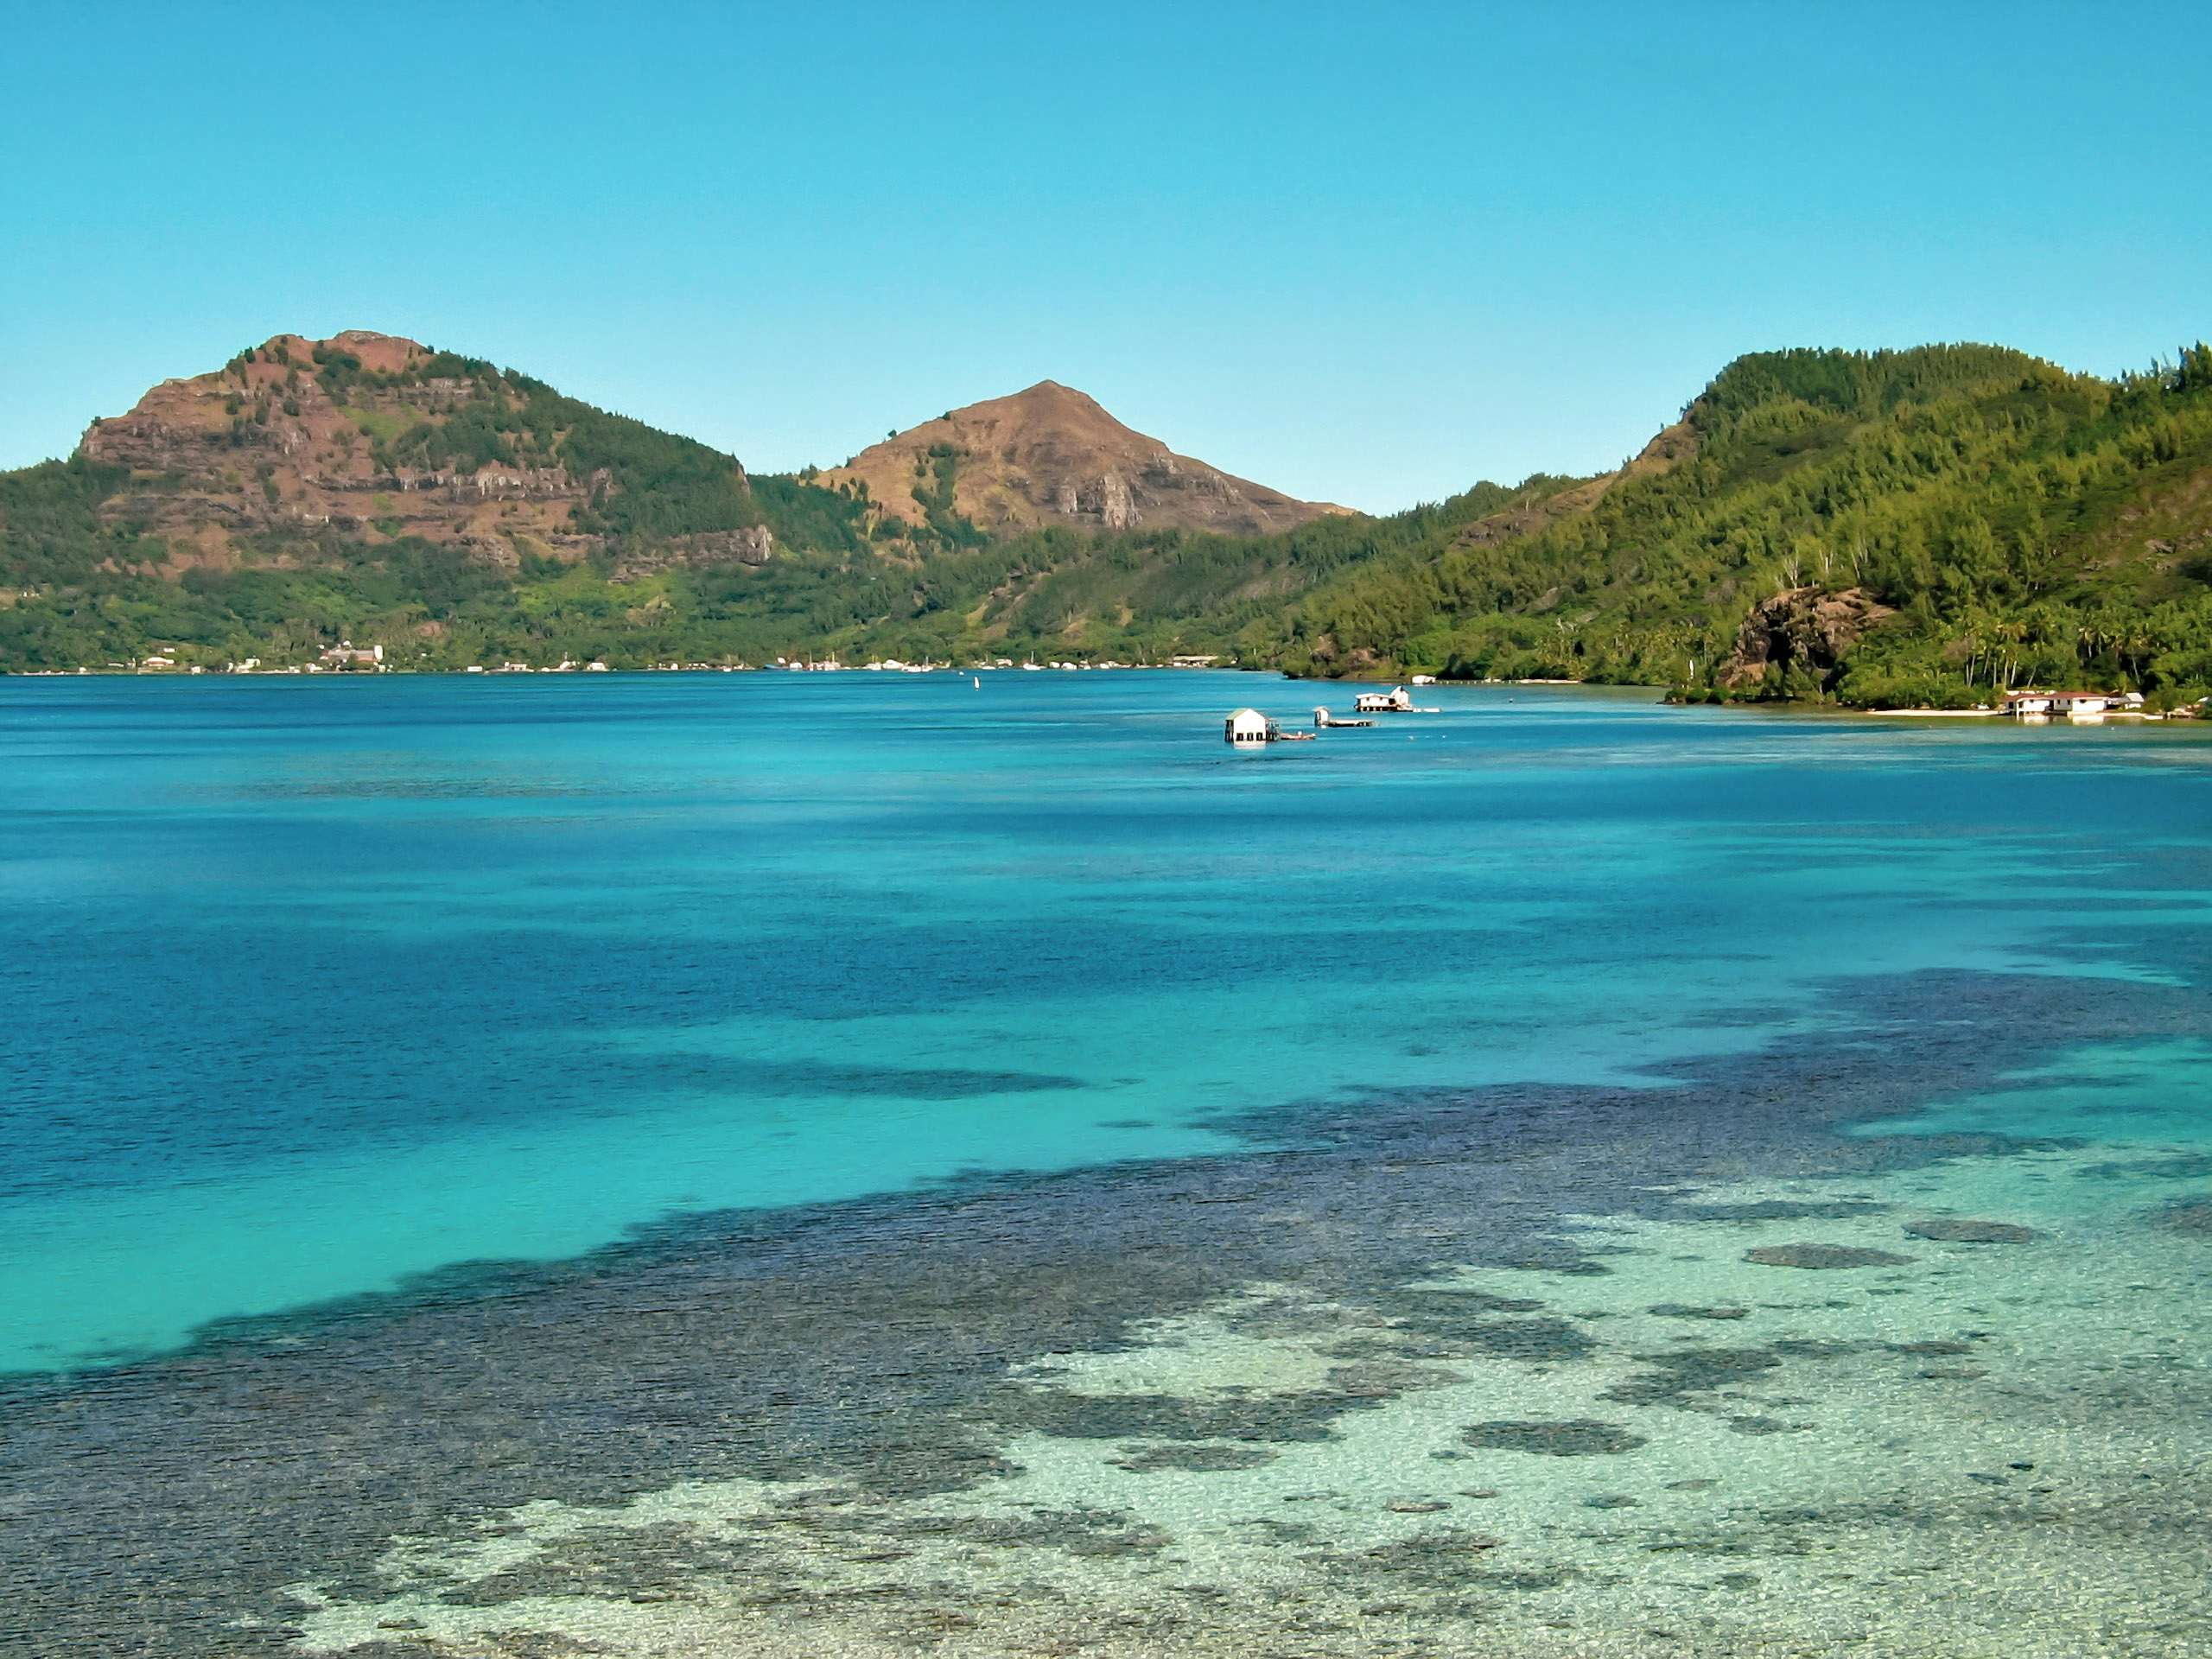 Tranquil coastal view of the Gambier Islands with clear blue waters and coral reefs in the foreground, anchored boats in the middle, and verdant hills in the background under a clear sky.